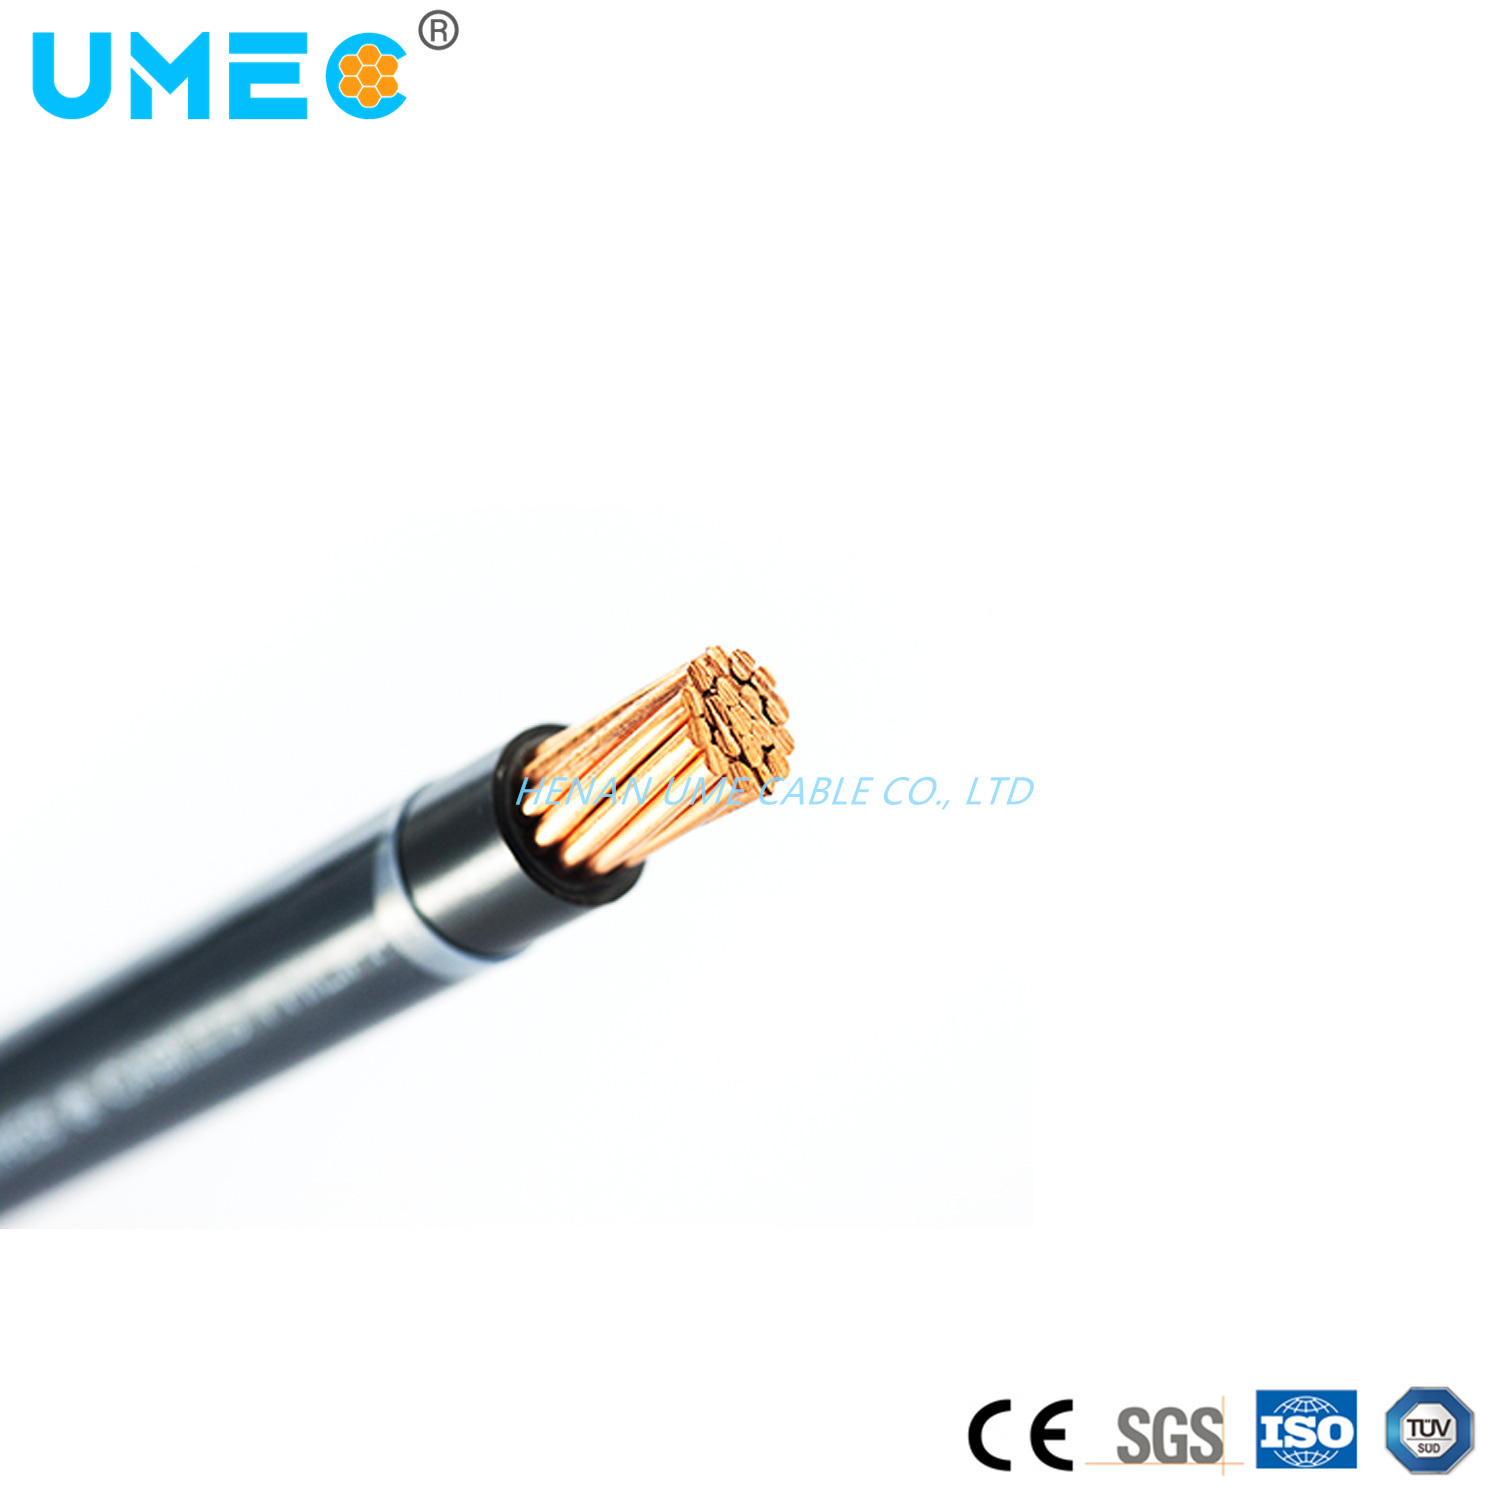 IEC60228 Thhn Black Stranded Copper Electric Cable 150mm2 14 AWG 12 AWG 10AWG 600V Thhn Thwn Cables Wires